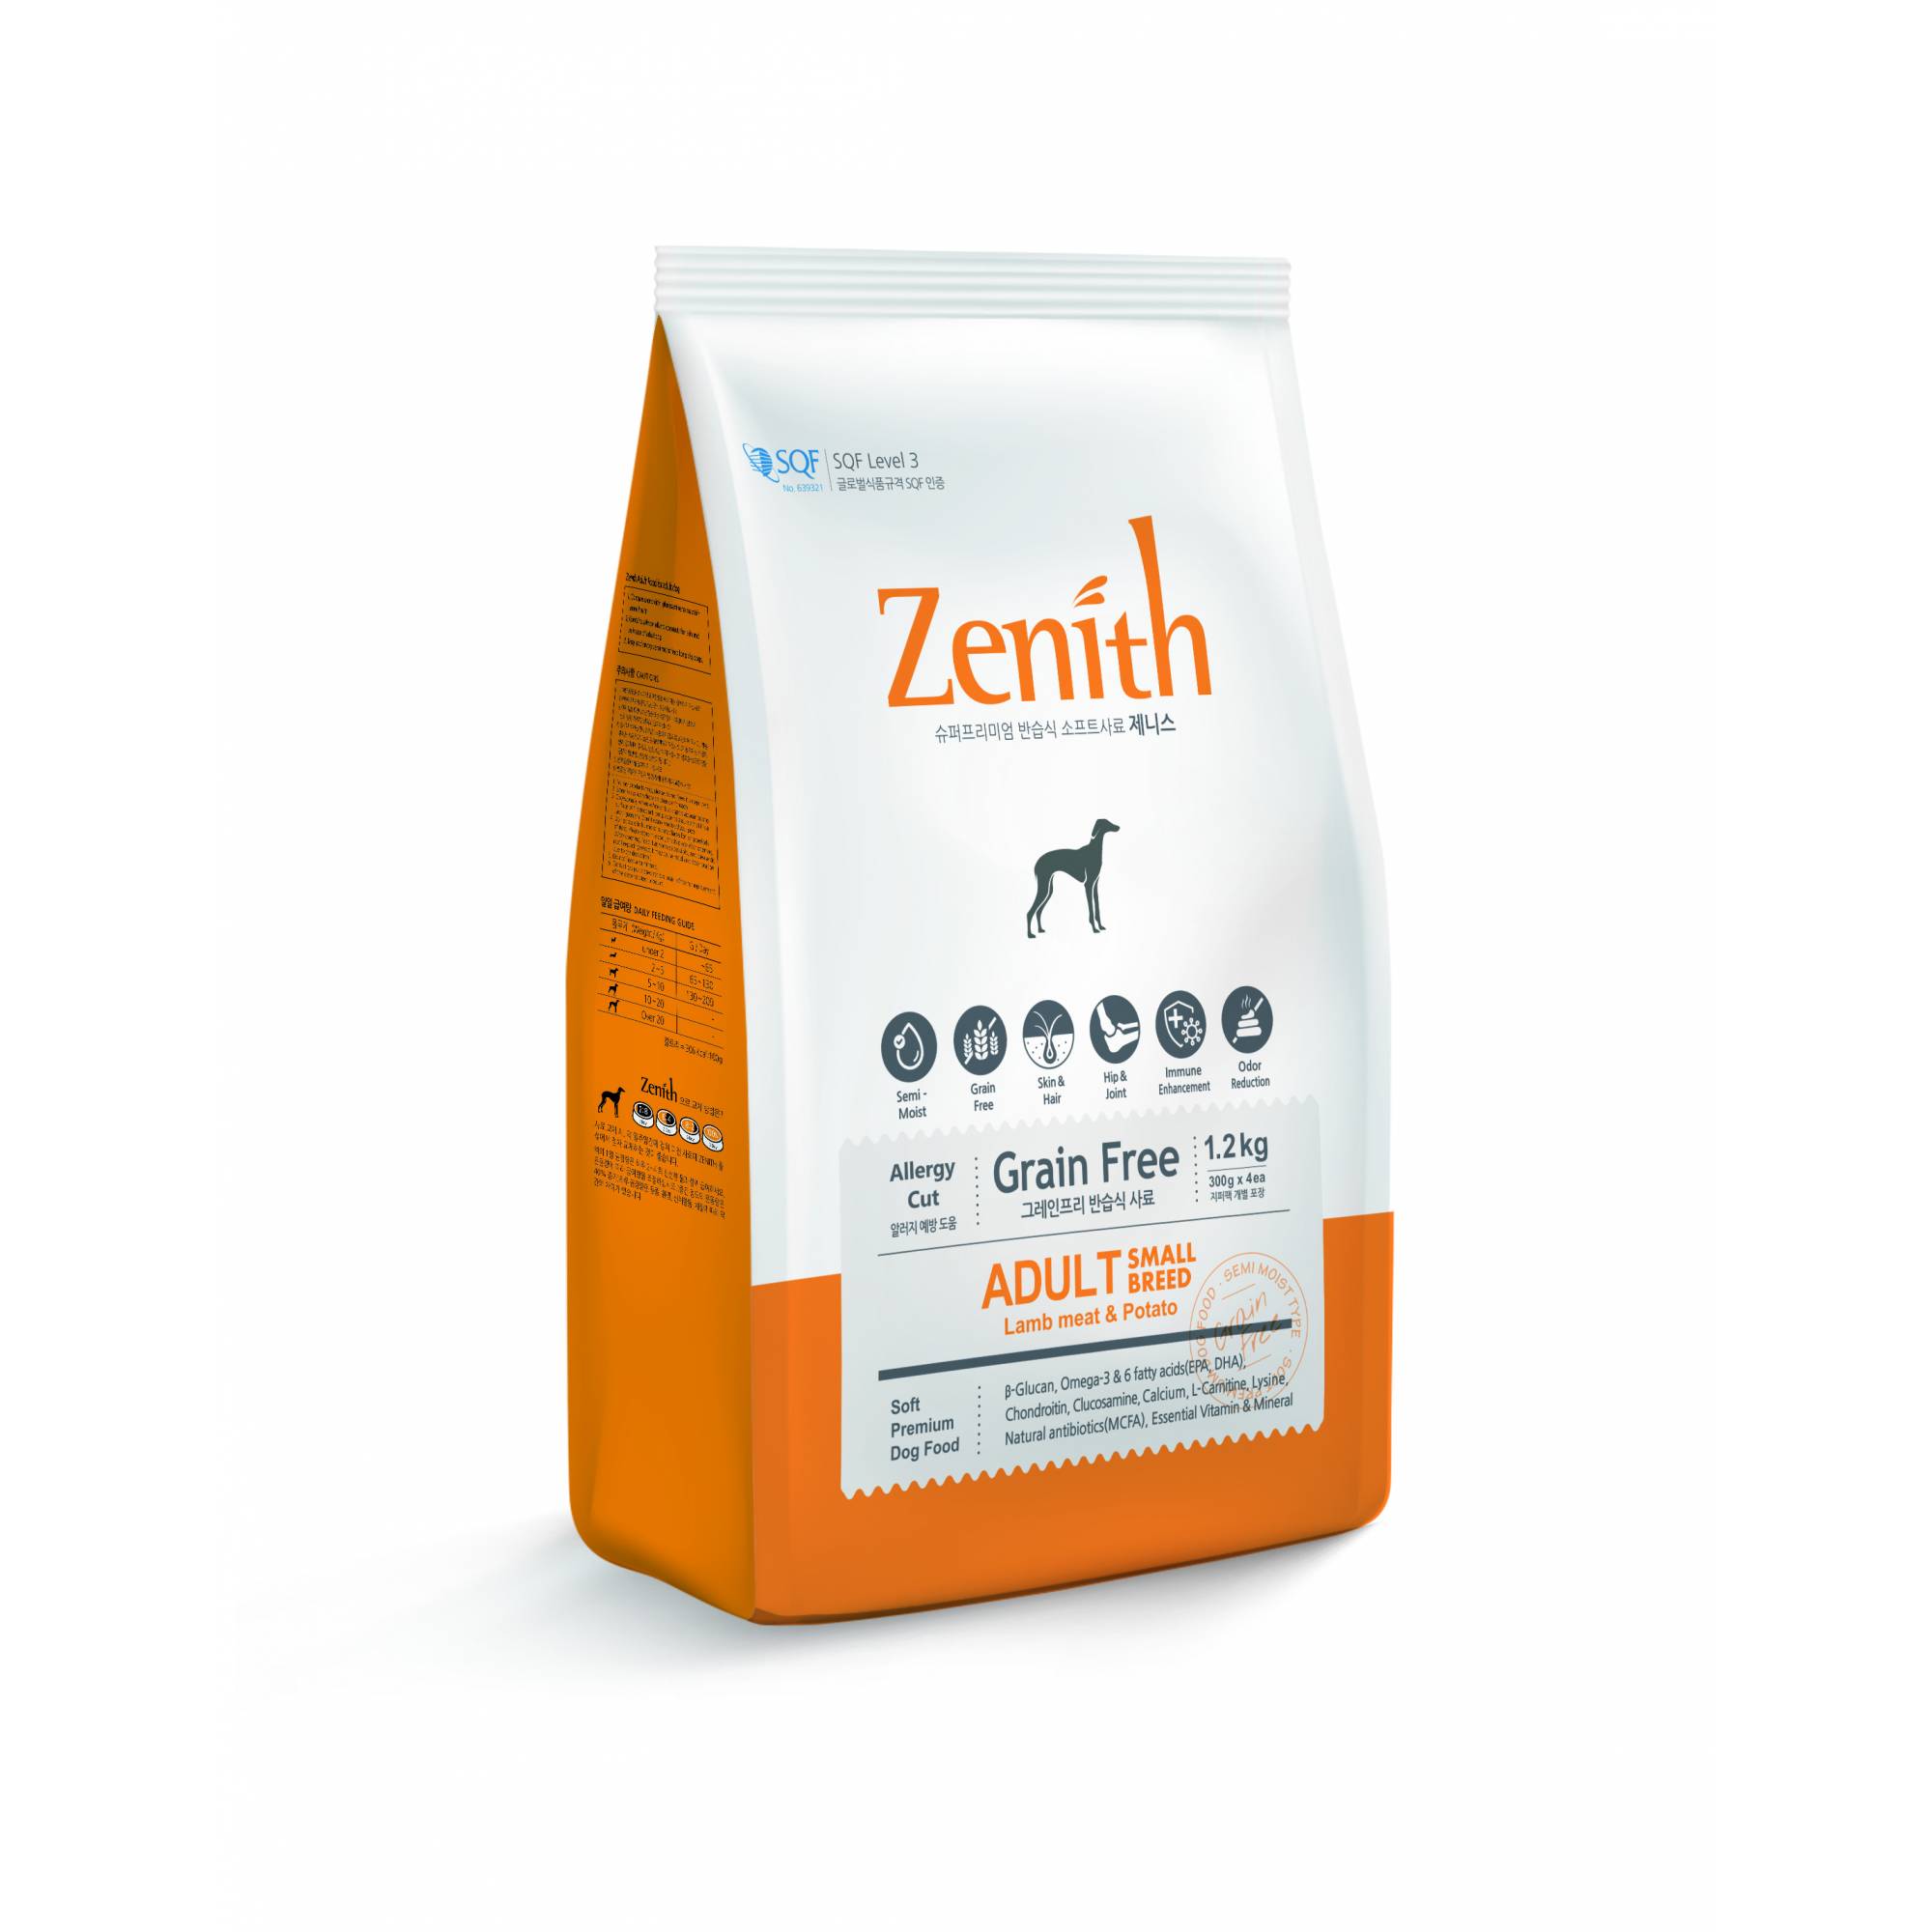 Bow Wow - Zenith Soft Kibble Small Breed Dry Dog Food 1.2kg (300g x 4 bags)